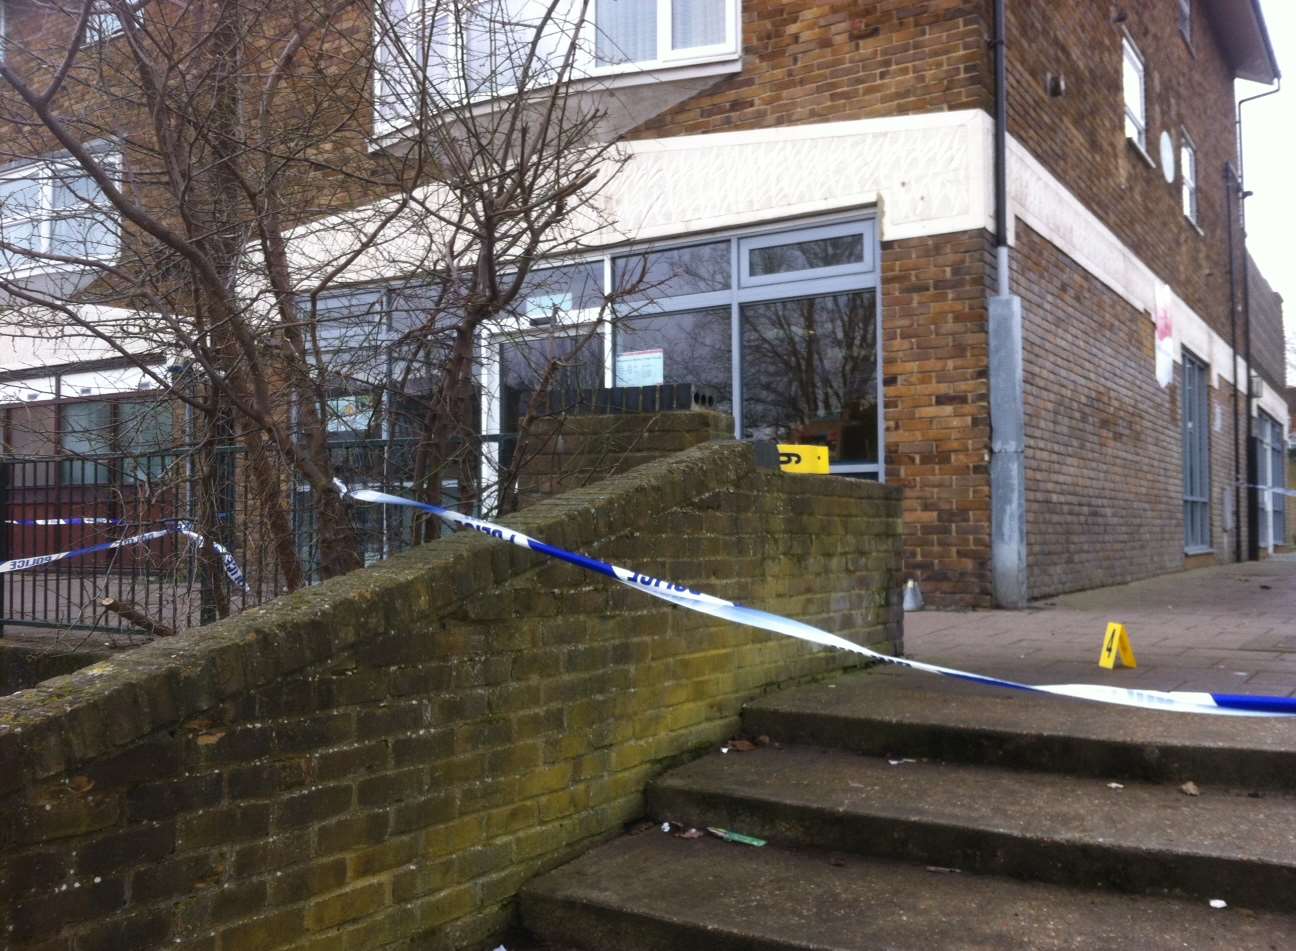 Police are investigating an incident near Mackenzie Way, Gravesend